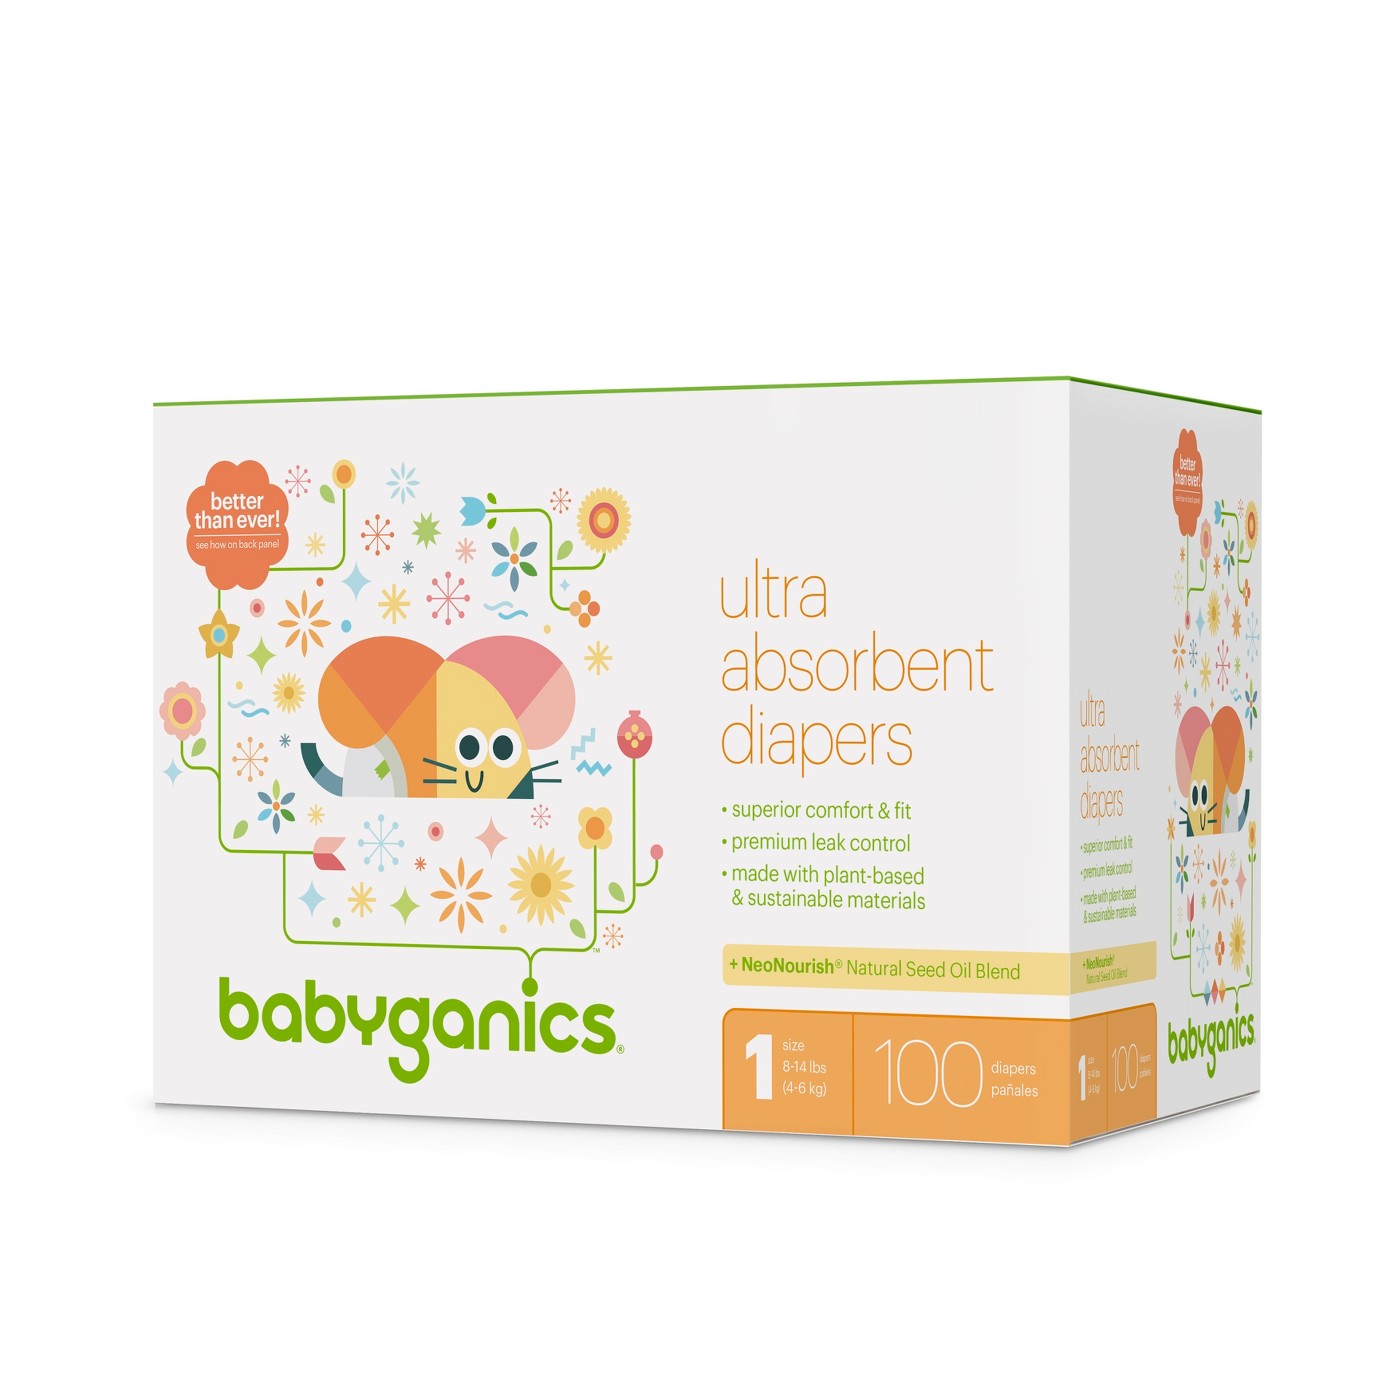 Babyganics Club Pack Diapers Only $15.99 After High Value Coupon and Gift Card!